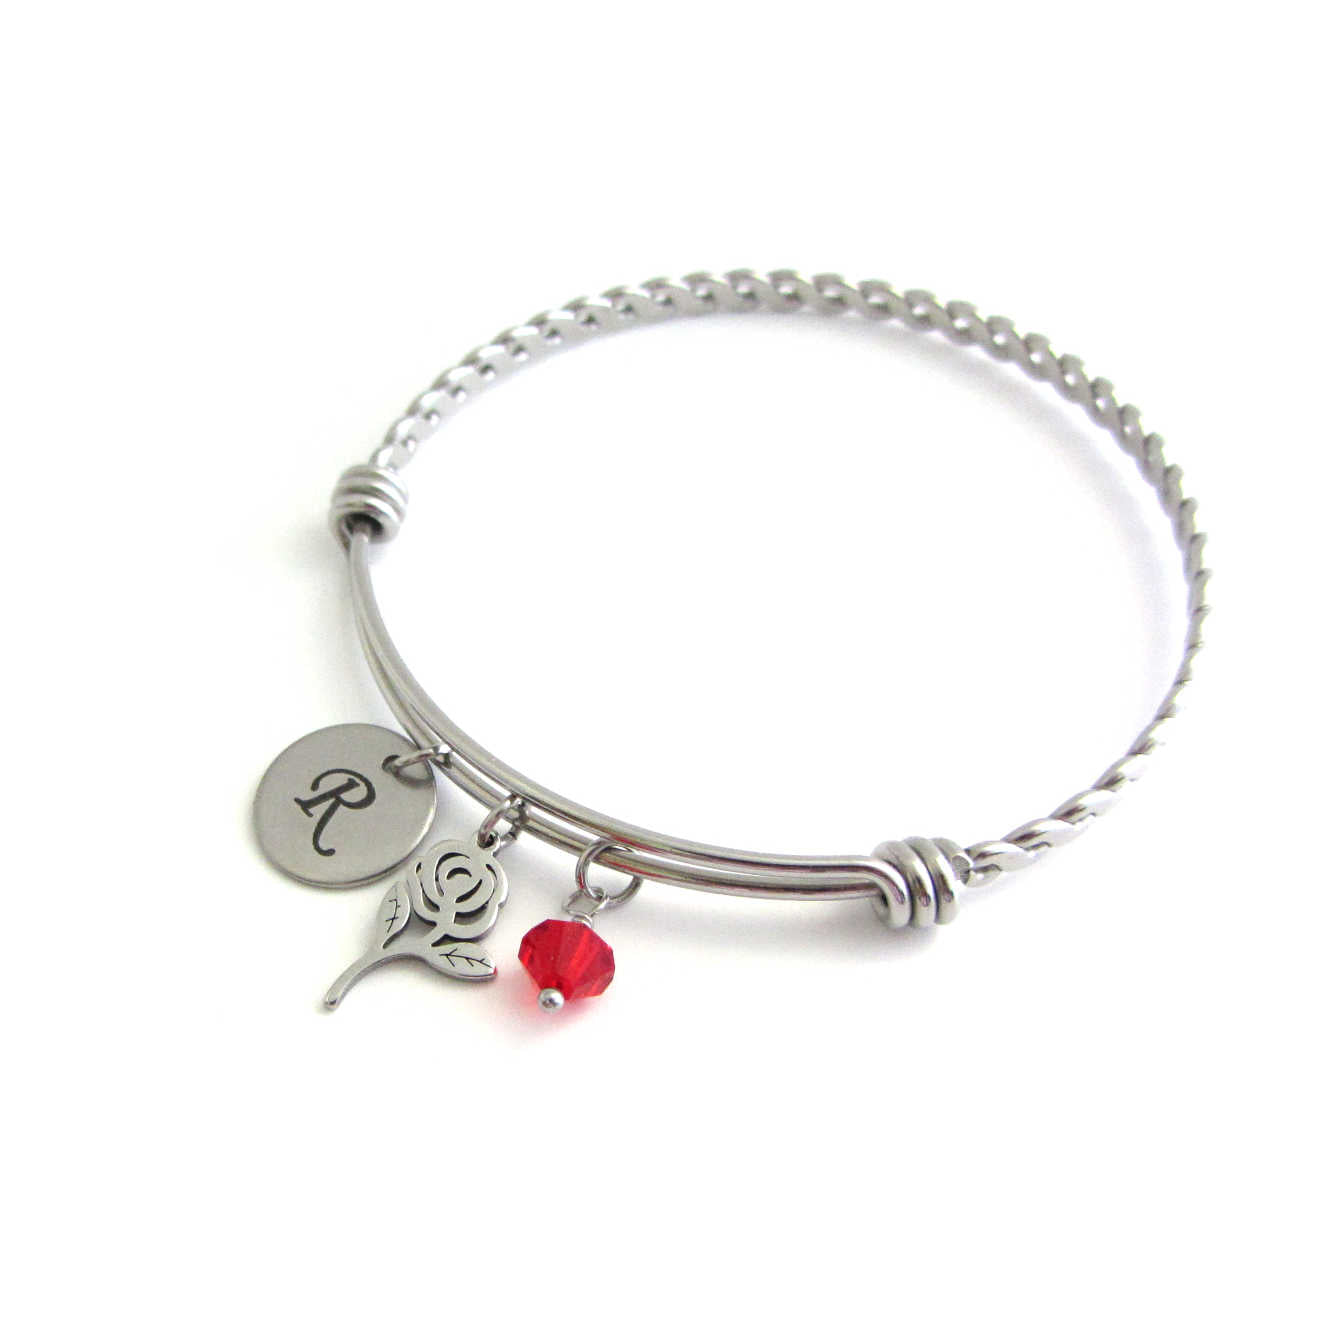 laser engraved capital initial letter disc charm, rose flower charm and a red crystal charm on a bangle with braided twist pattern